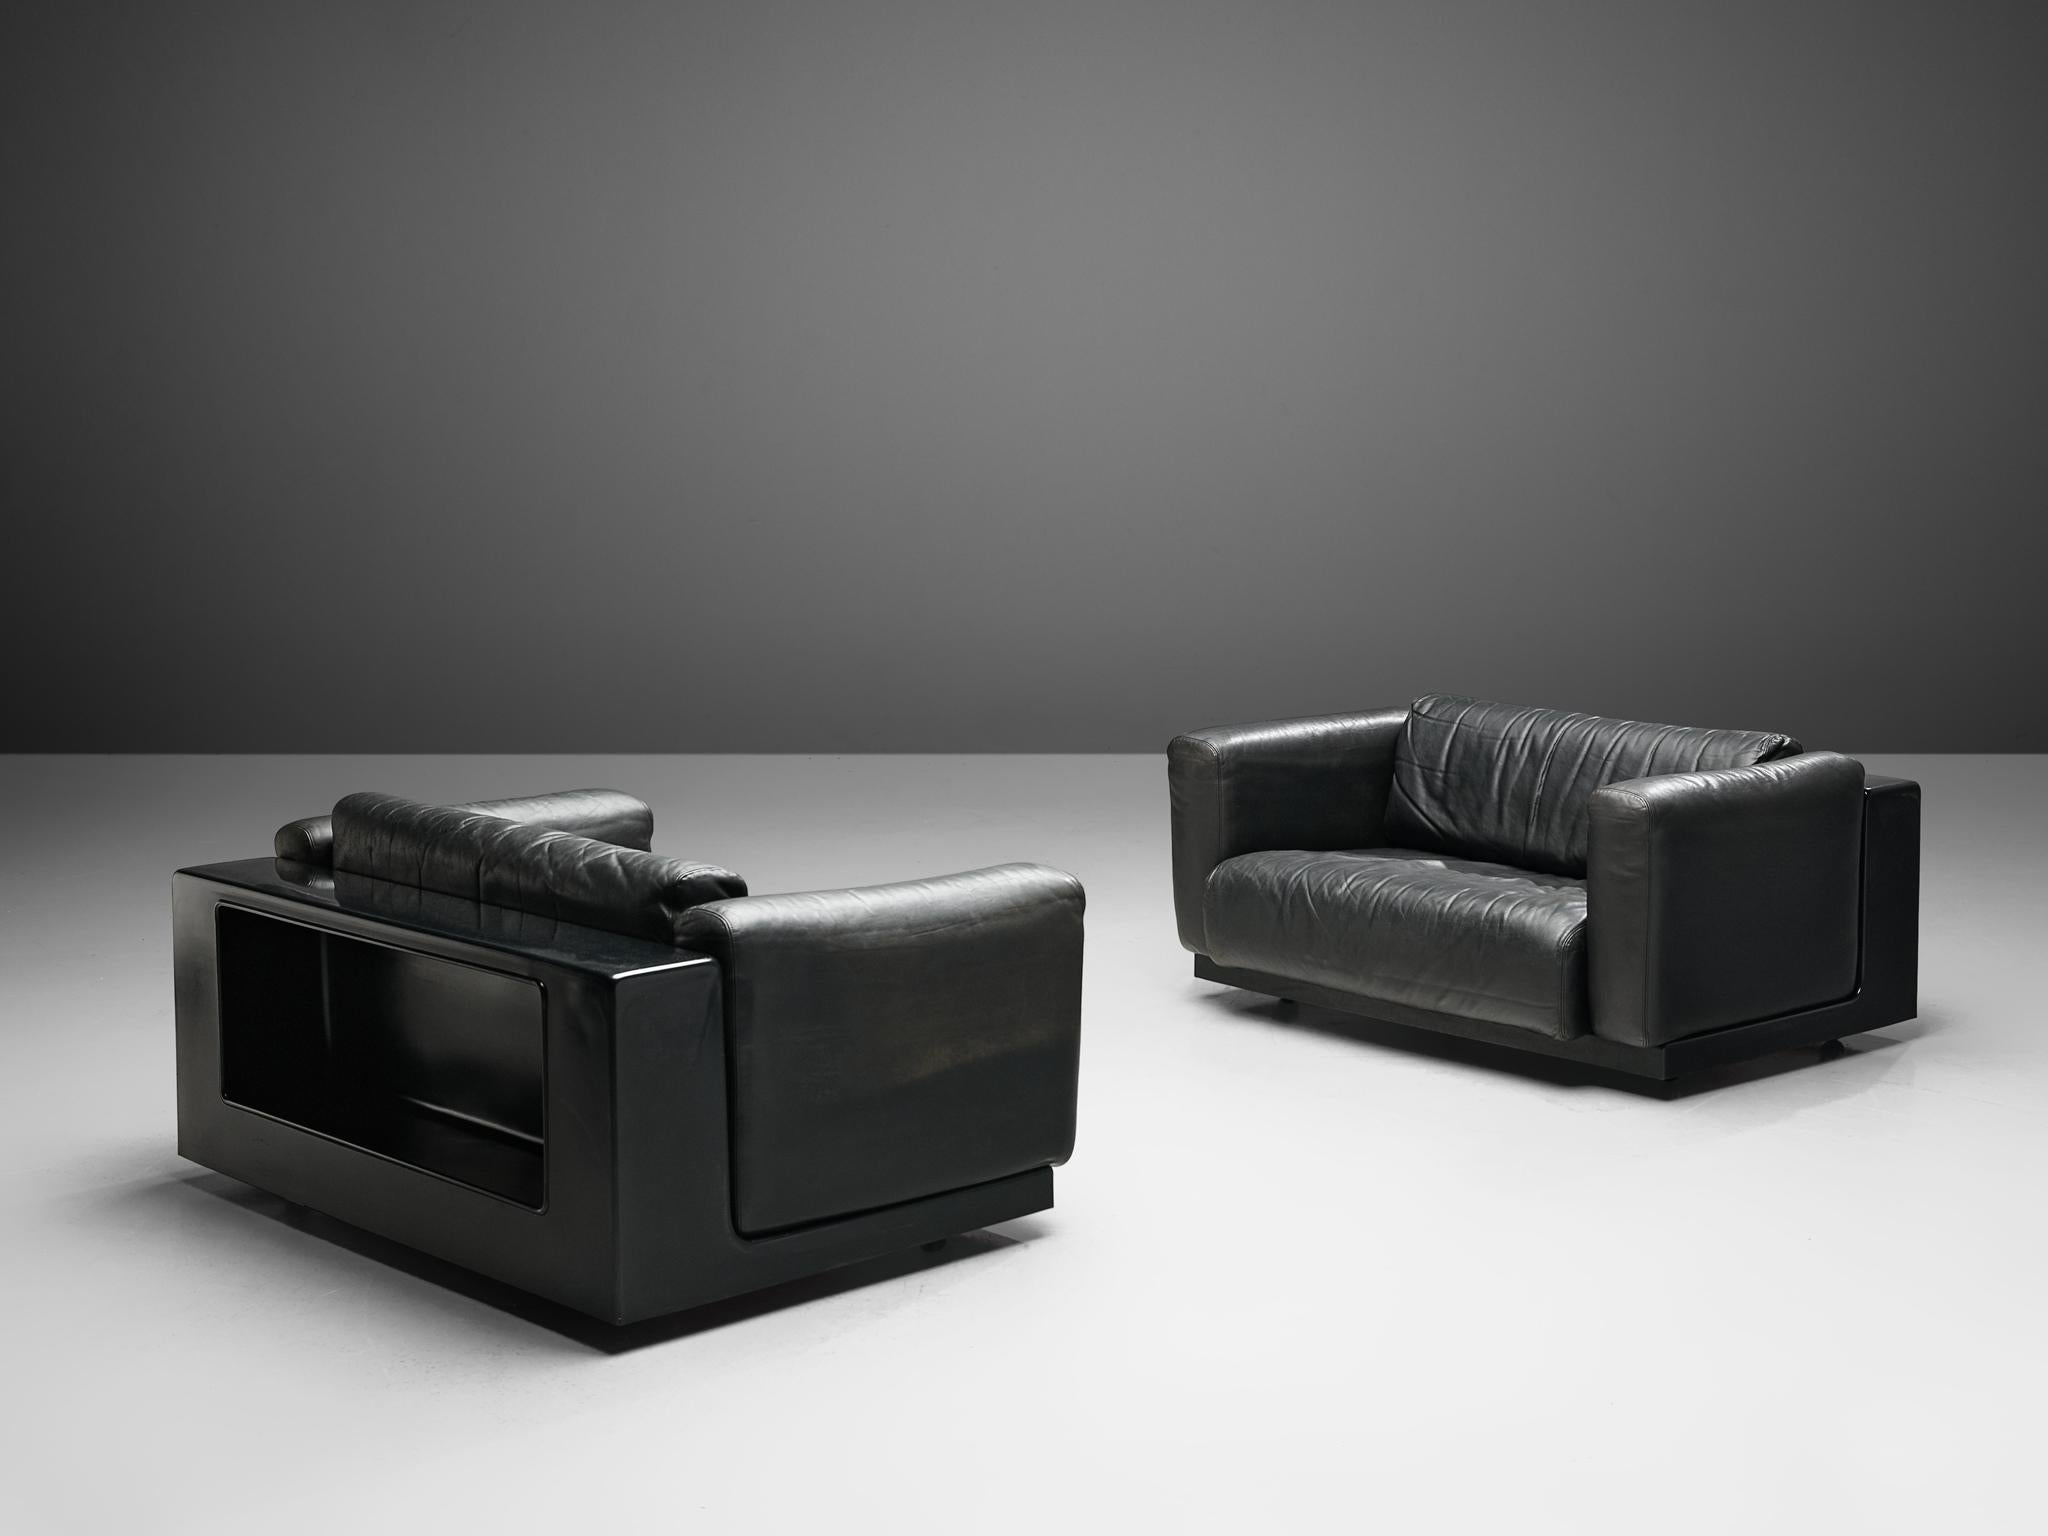 Cini Boeri for Knoll, pair of love seats, part of the 'Gradual' set, black leather, fiberglass, Italy, 1970s.

This pair of stunning black love seats was designed by Cini Boeri for Knoll and is part of the 'Gradual' sectional sofa. The design is